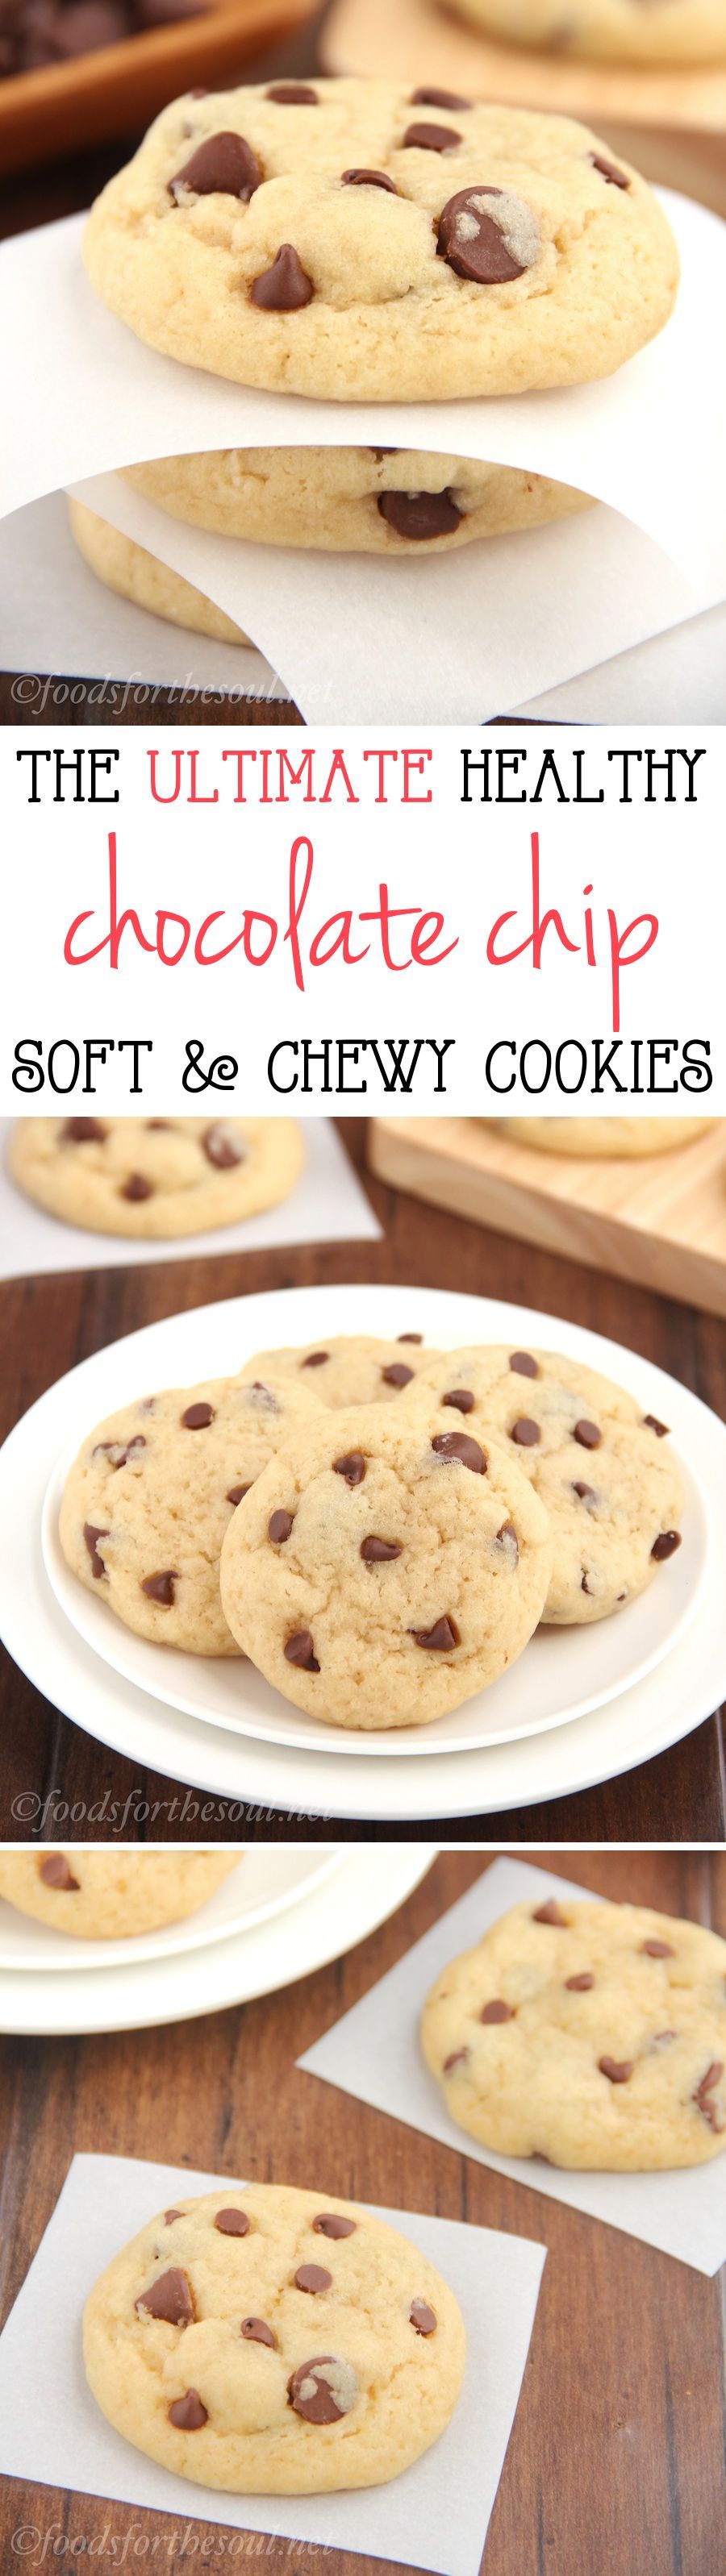 The ULTIMATE Healthy Chocolate Chip Cookies — so buttery, soft & chewy! No one would ever guess they’re secretly skinny & low in